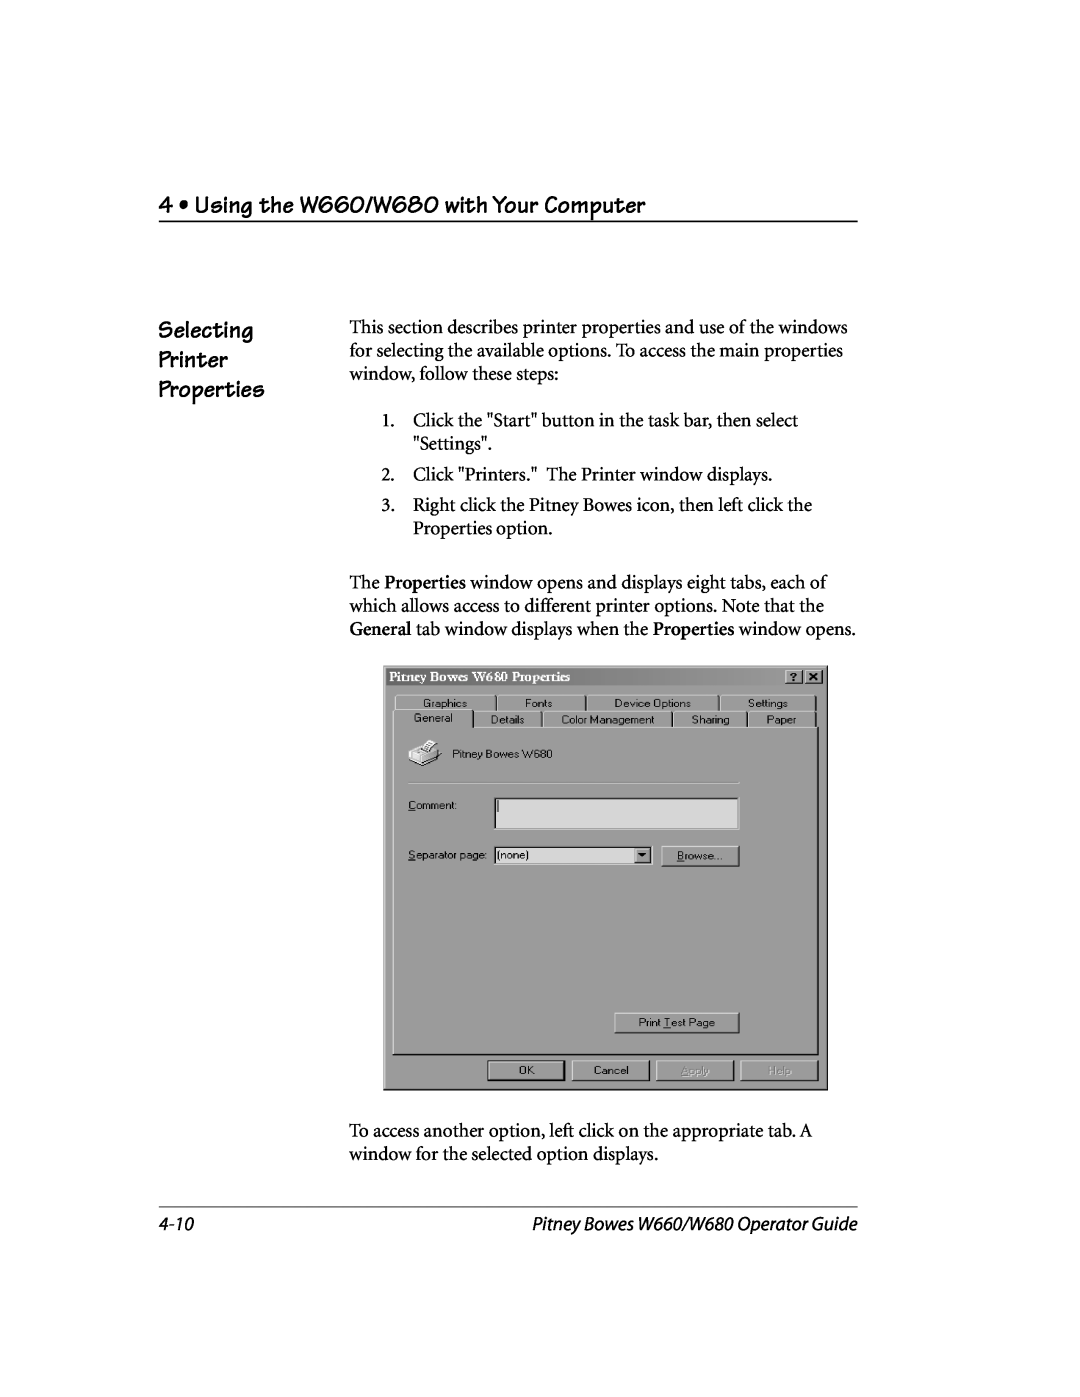 Pitney Bowes manual Selecting Printer Properties, Using the W660/W680 with Your Computer 